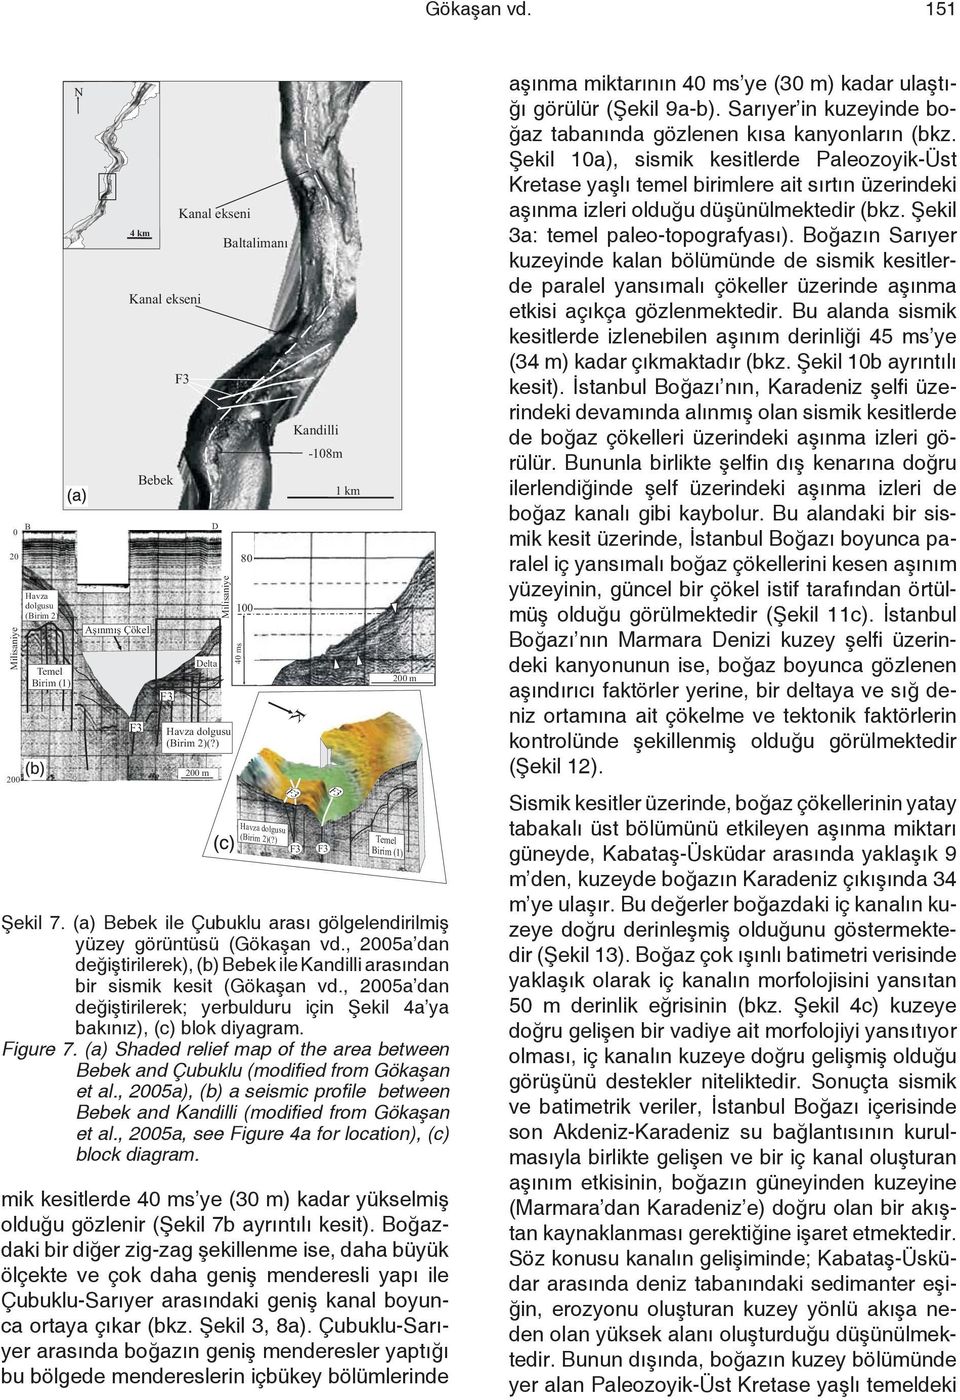 , 2005a), (b) a seismic profile between Bebek and Kandilli (modified from Gökaşan et al., 2005a, see Figure 4a for location), (c) block diagram.